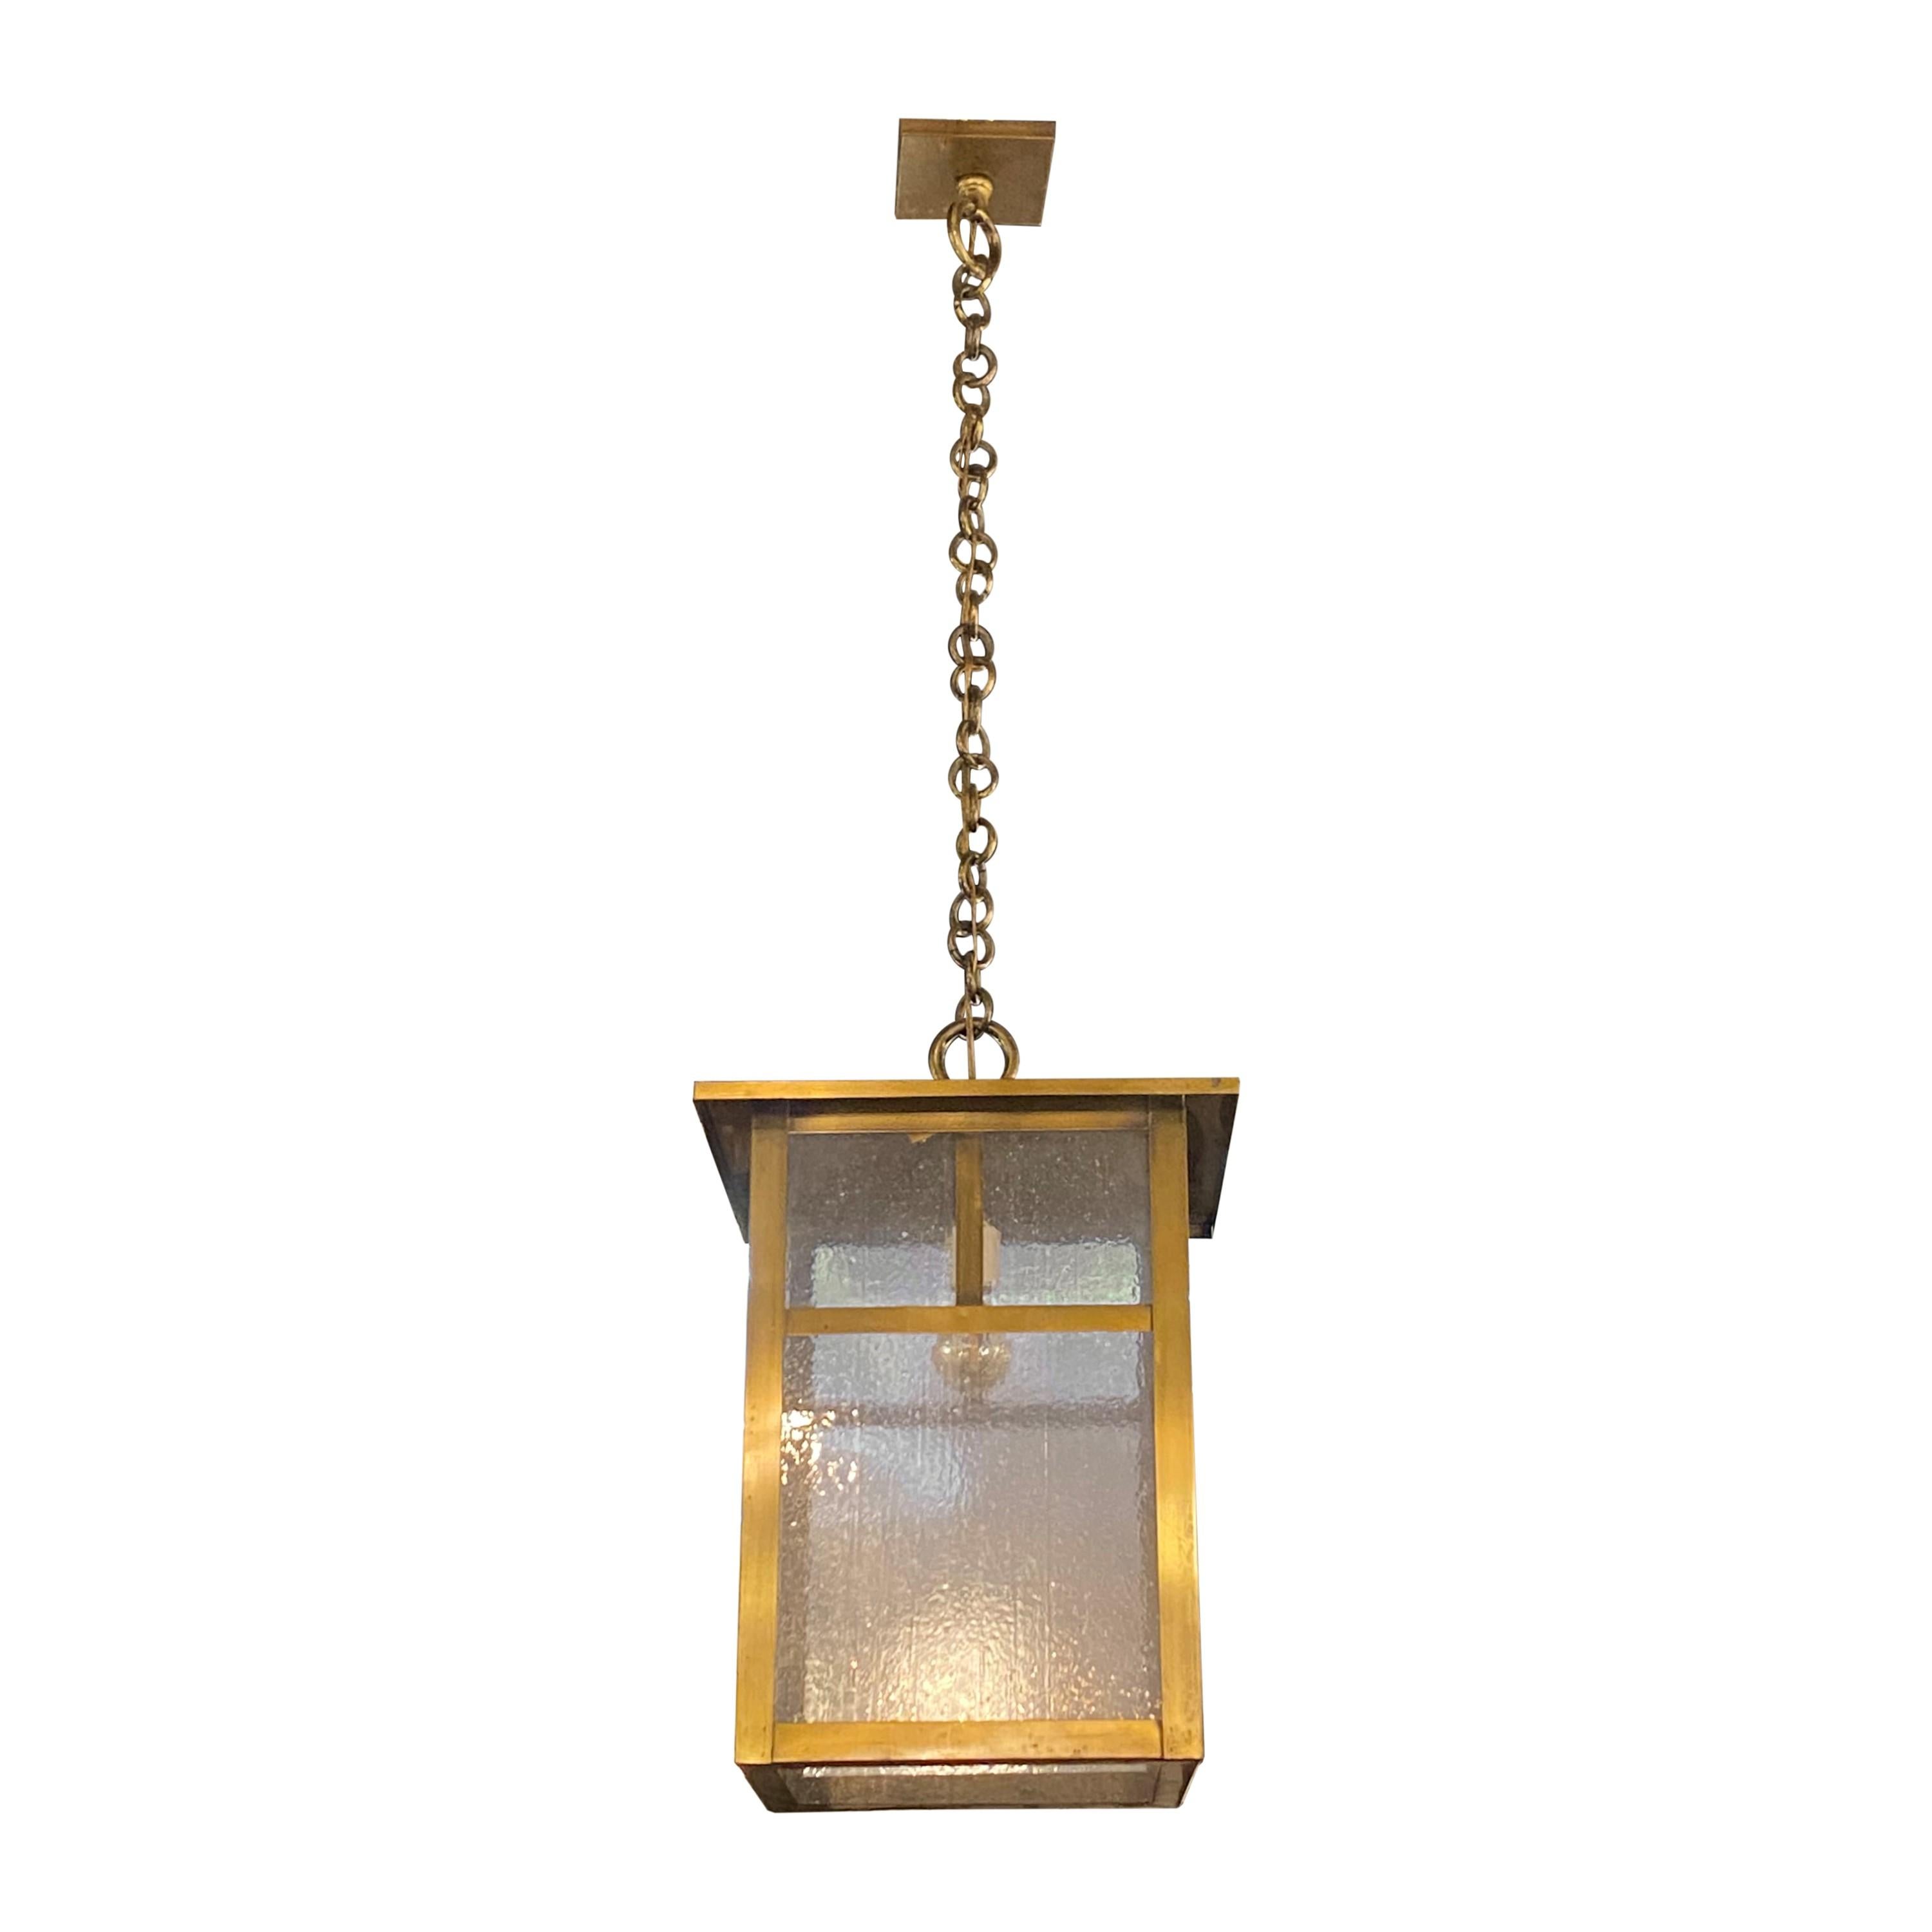 Cleaned and restored early 20th century Arts & Crafts pendant light in a lantern design. Features clear textured glass shades and a matching square ceiling canopy. Takes one E26 standard household lightbulb. Please note, this item is located in one